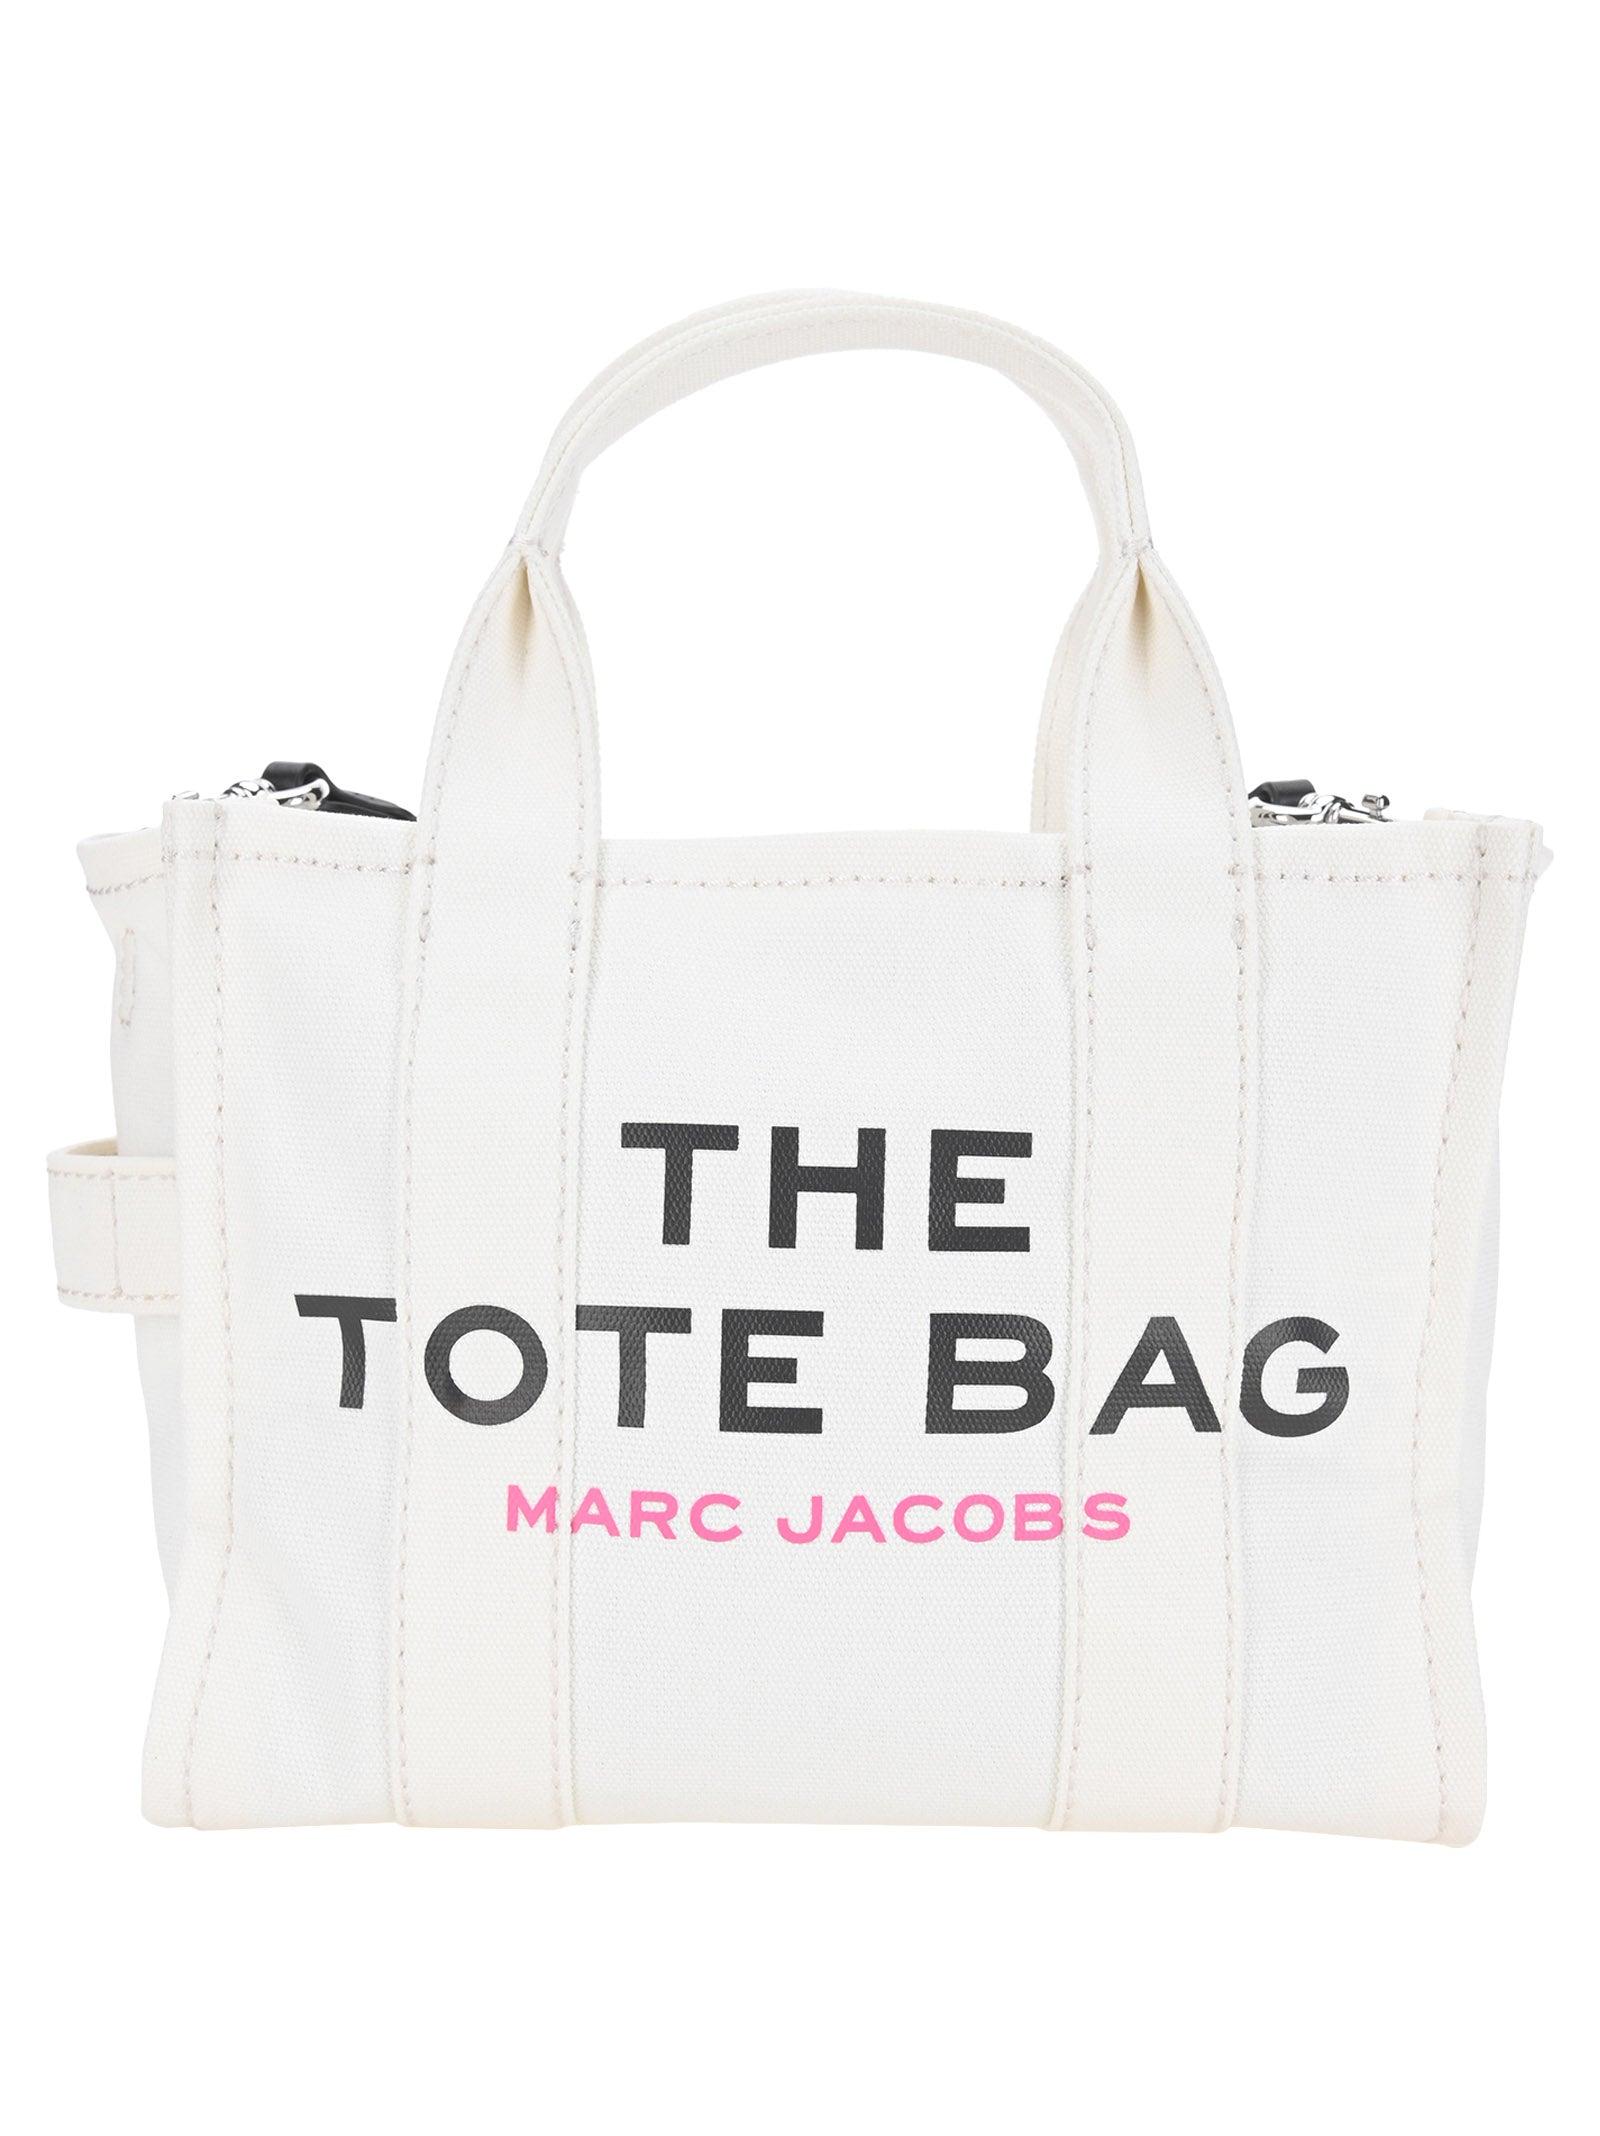 Marc Jacobs X Peanuts The Snoopy Mini Tote Bag in White | Lyst